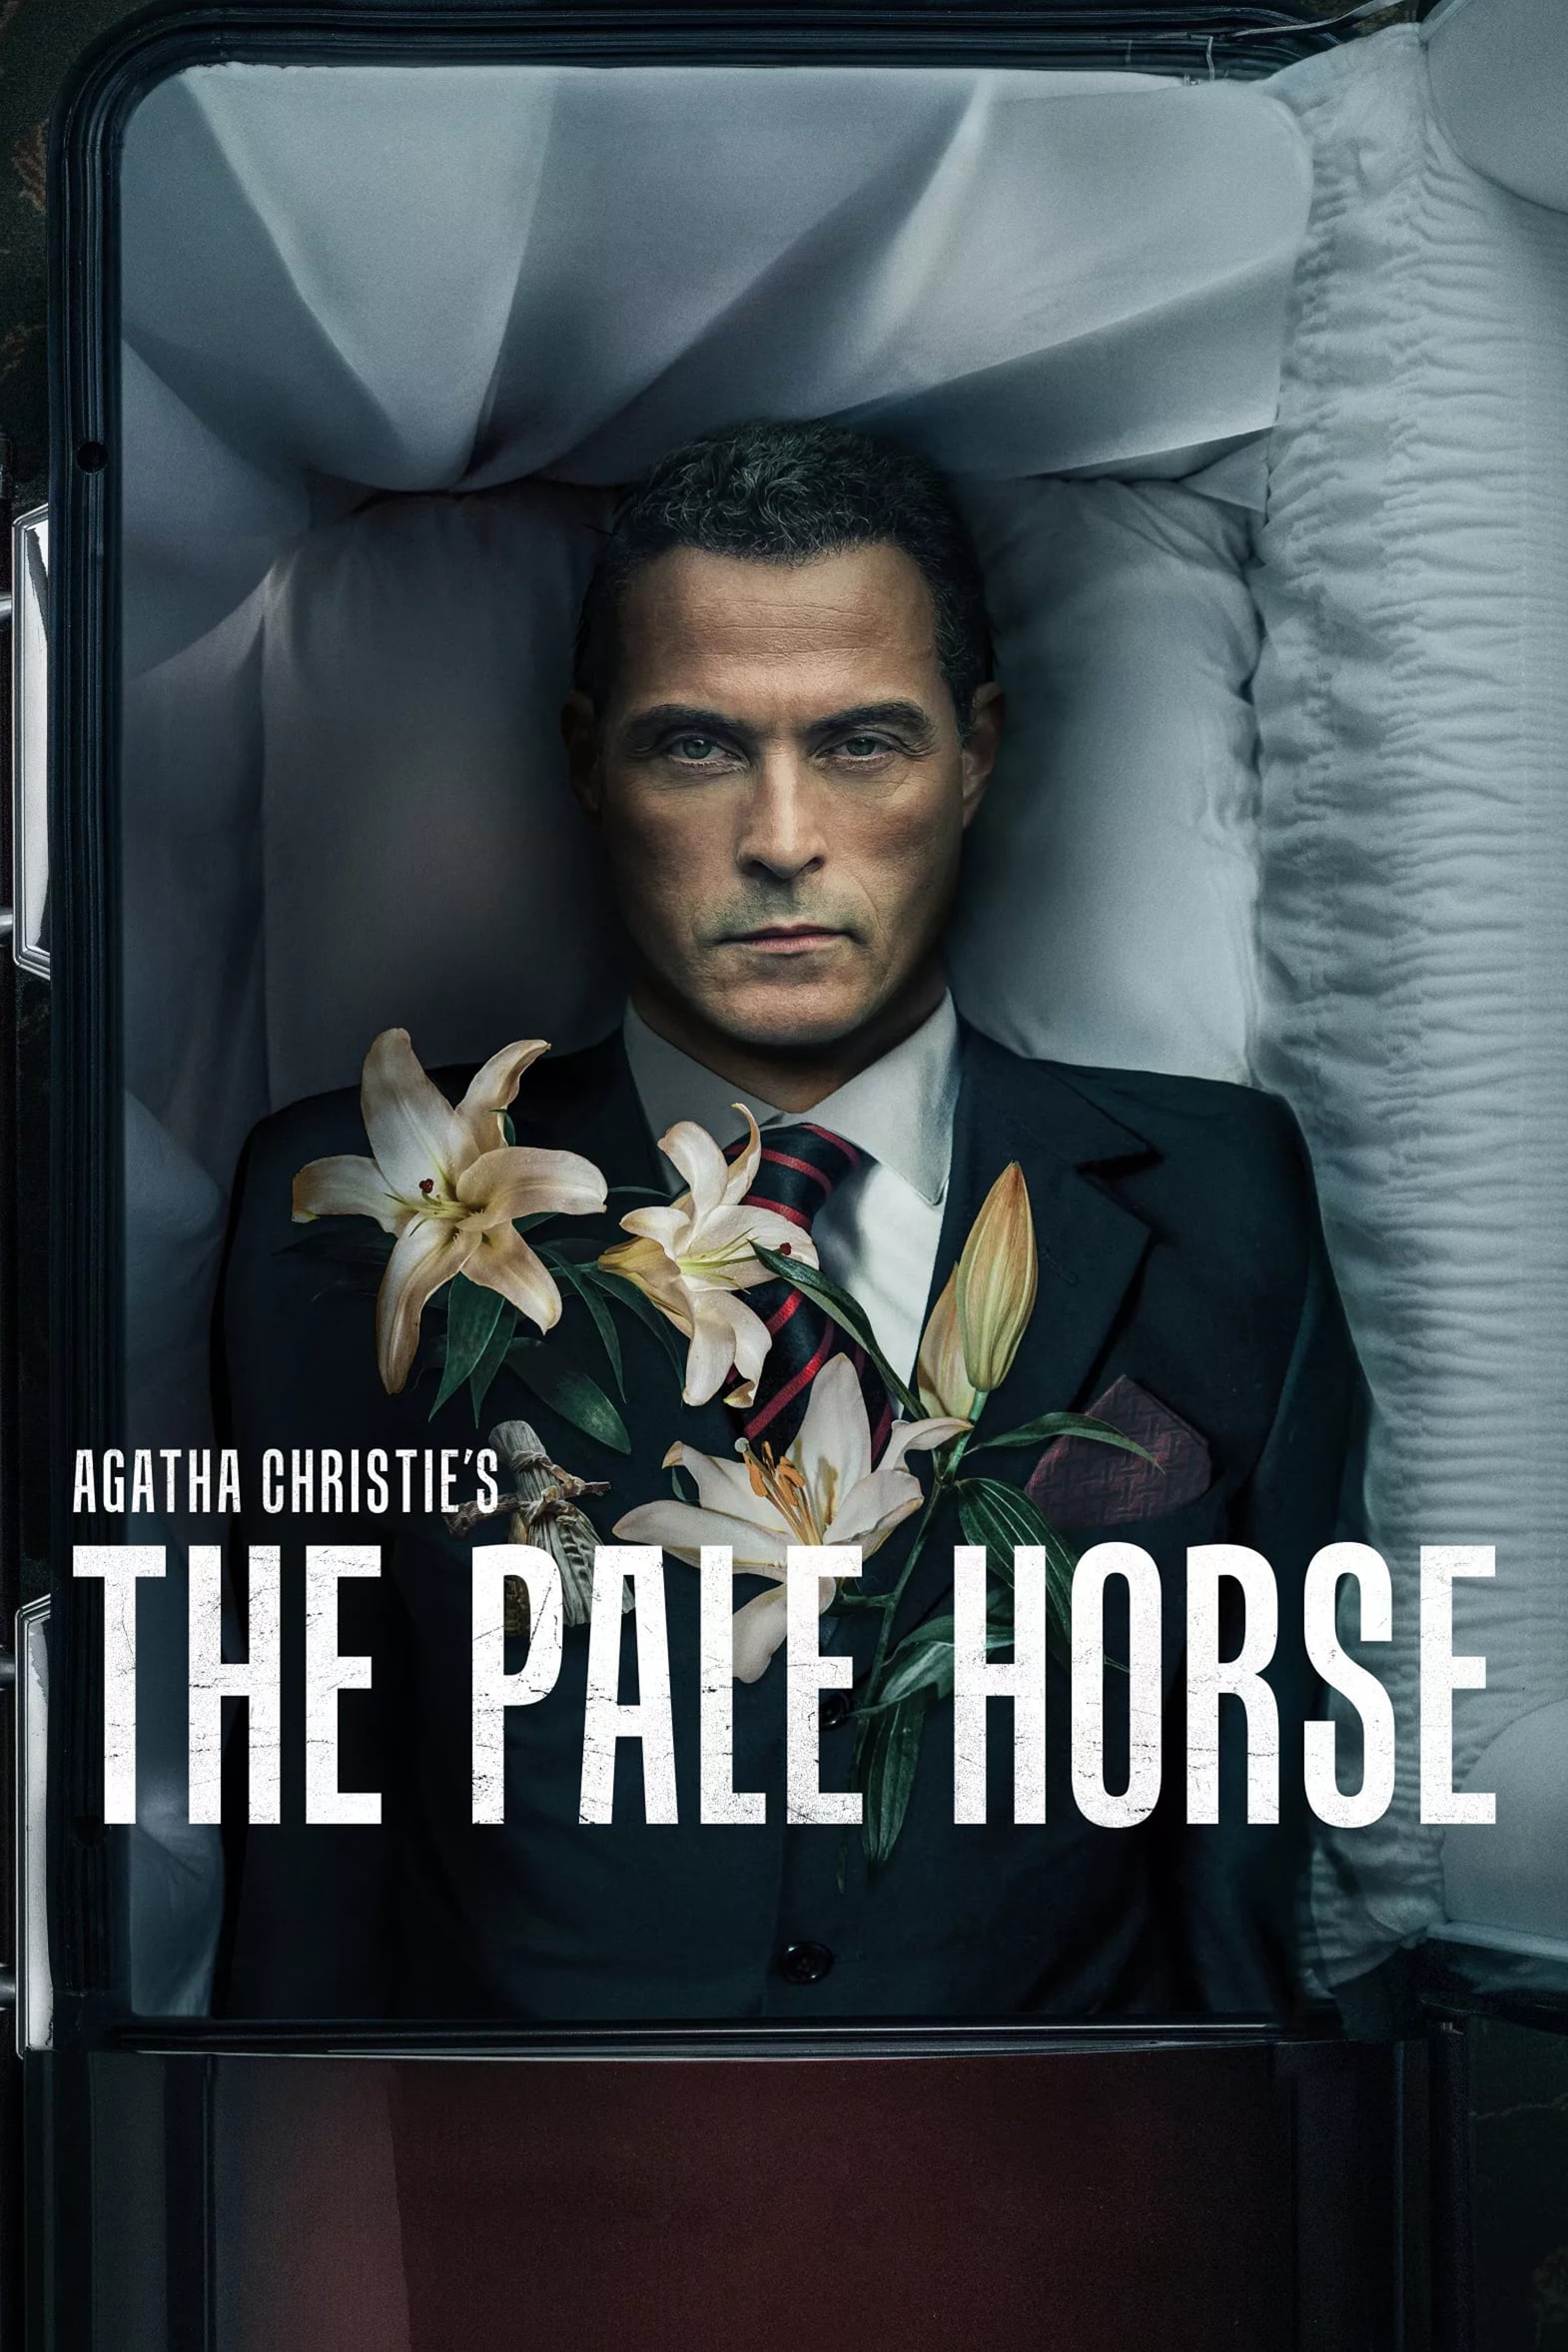 The Pale Horse TV Shows About 1960s